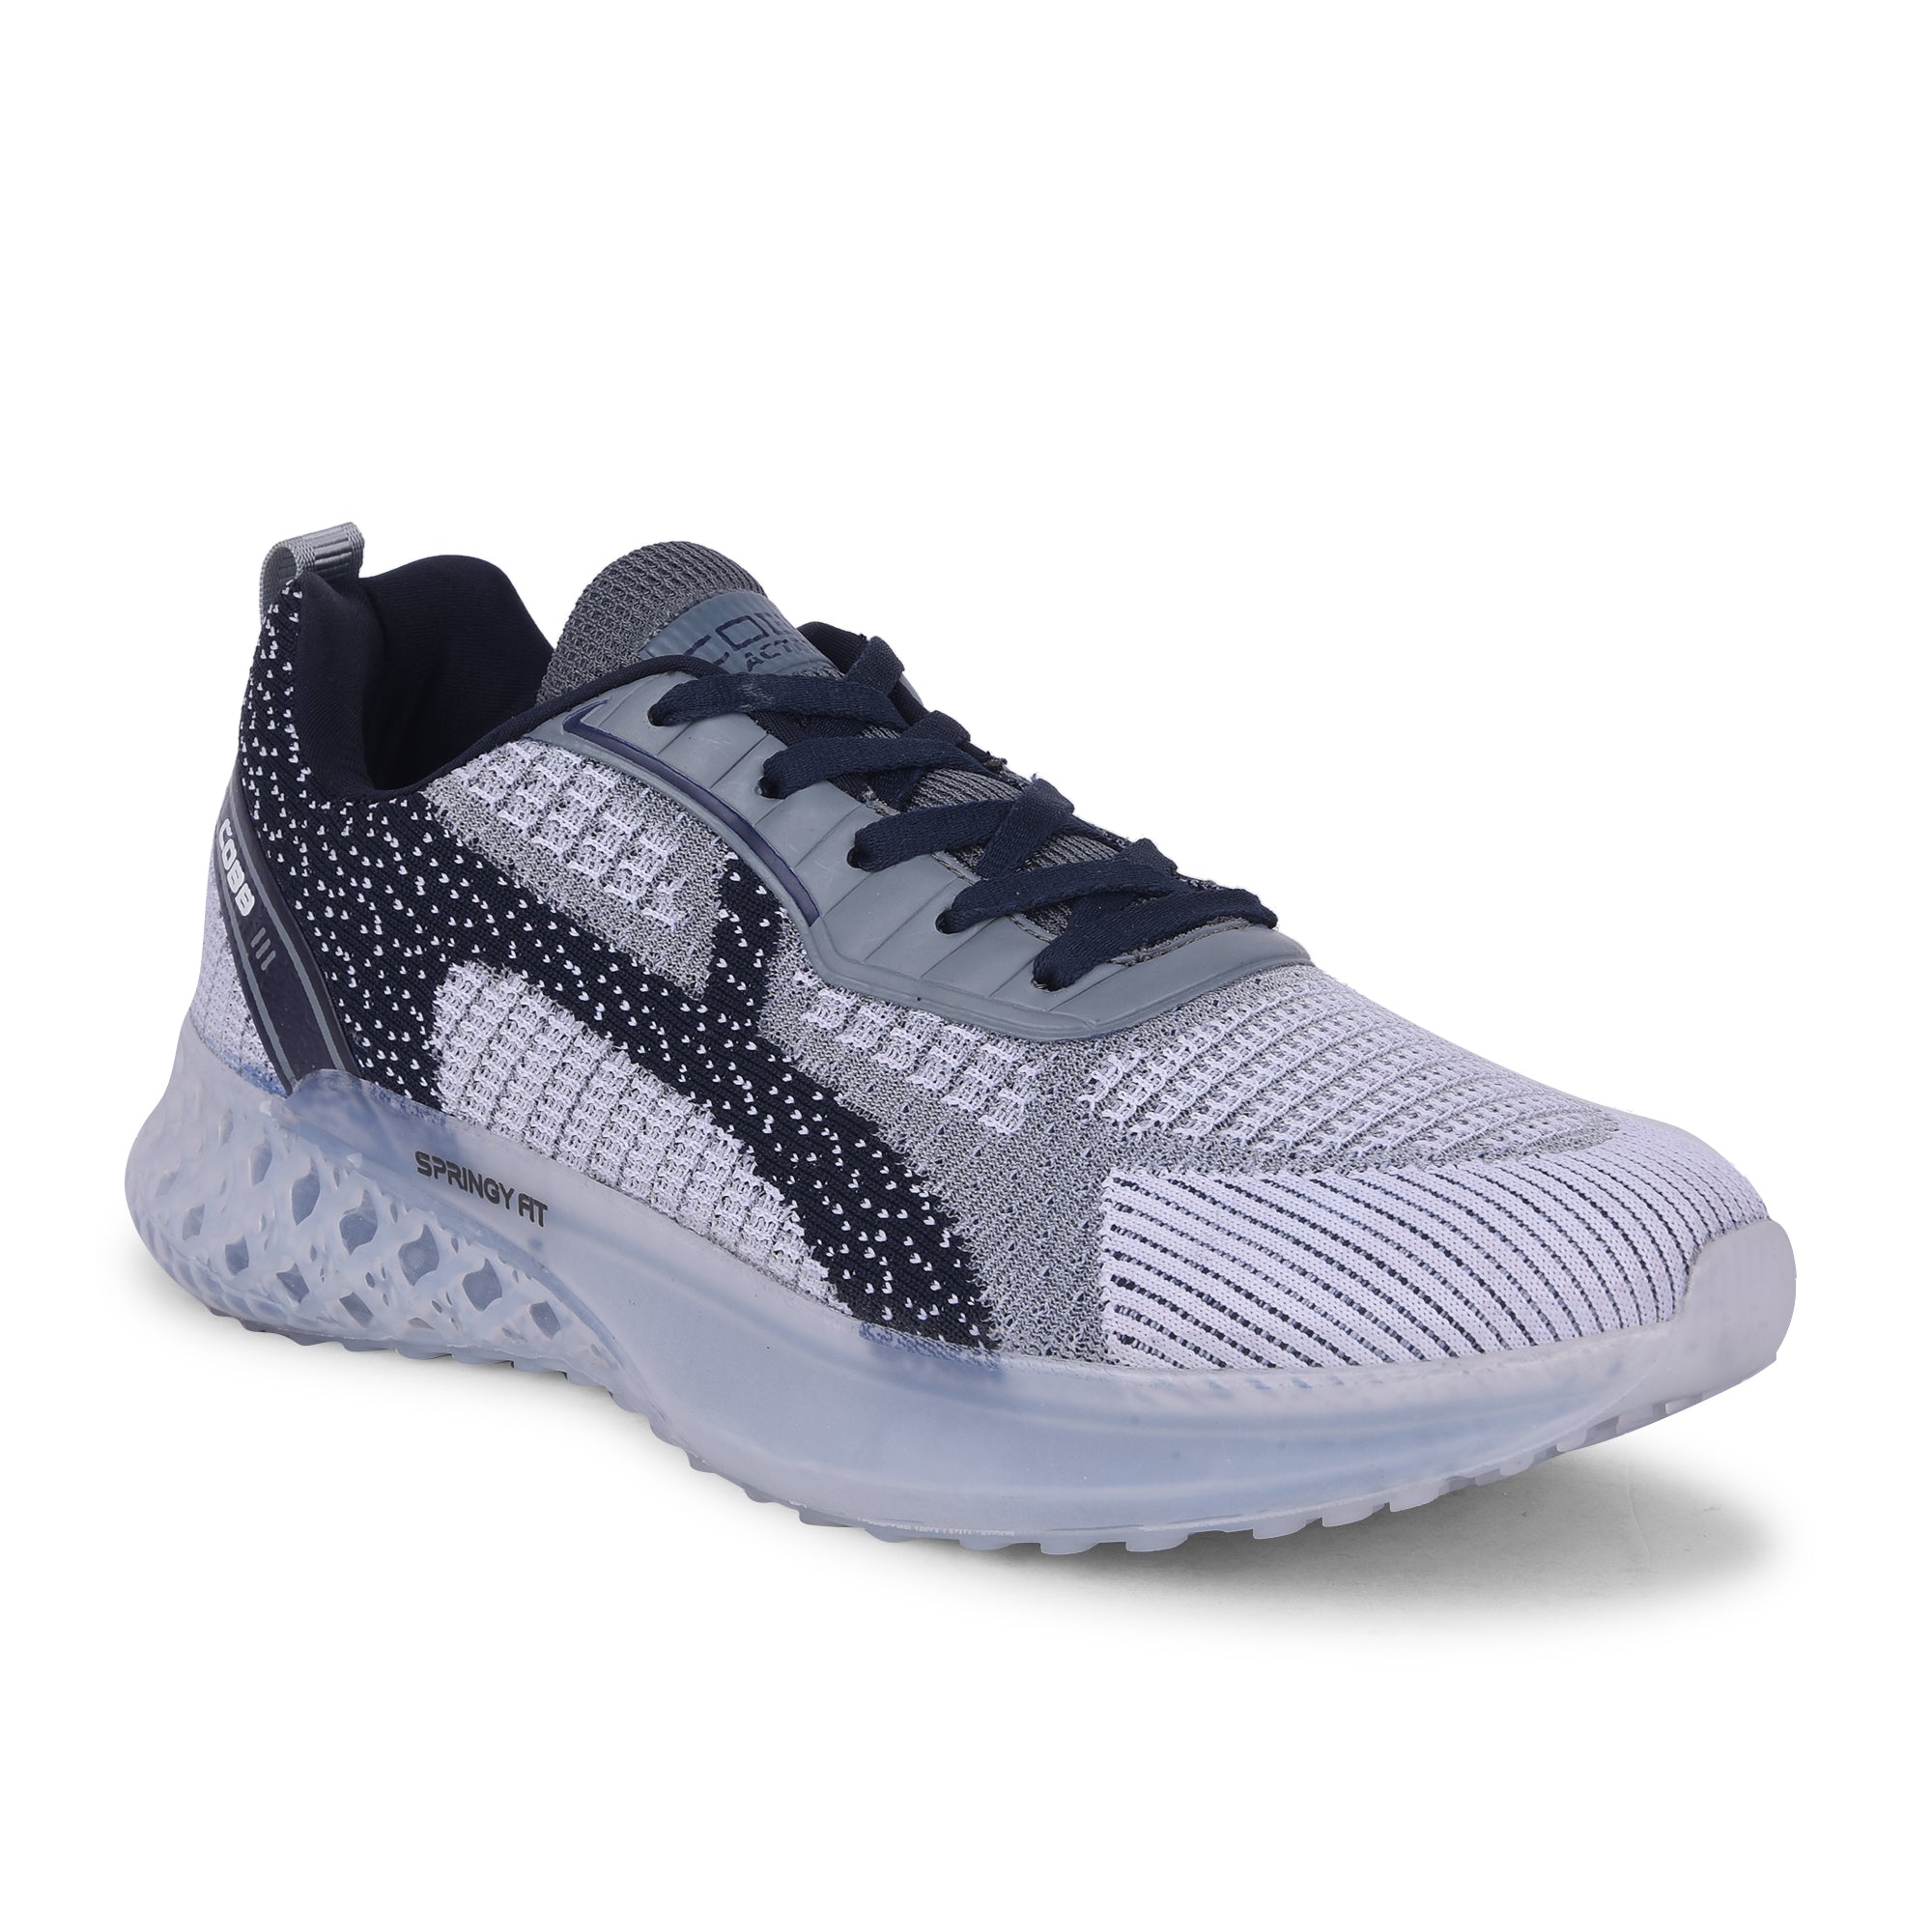 cobb springy fit navy white men's running shoes